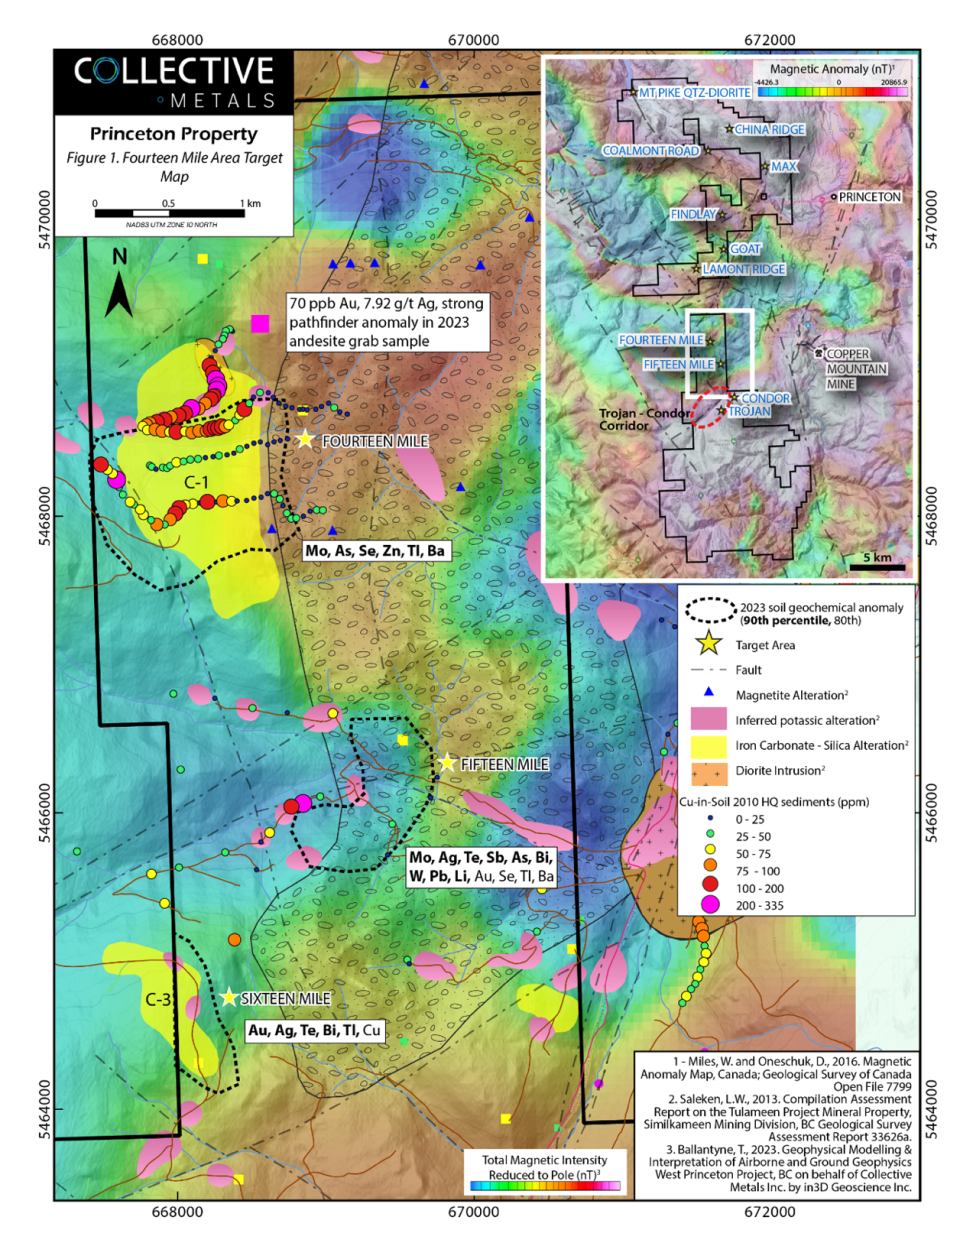 Fourteen, Fifteen and Sixteen Mile Target Areas with Aeromagnetic anomalies, alteration, intrusions, 2011 high-quality sieved sediment samples and 2023 soil pathfinder anomaly geochemistry.